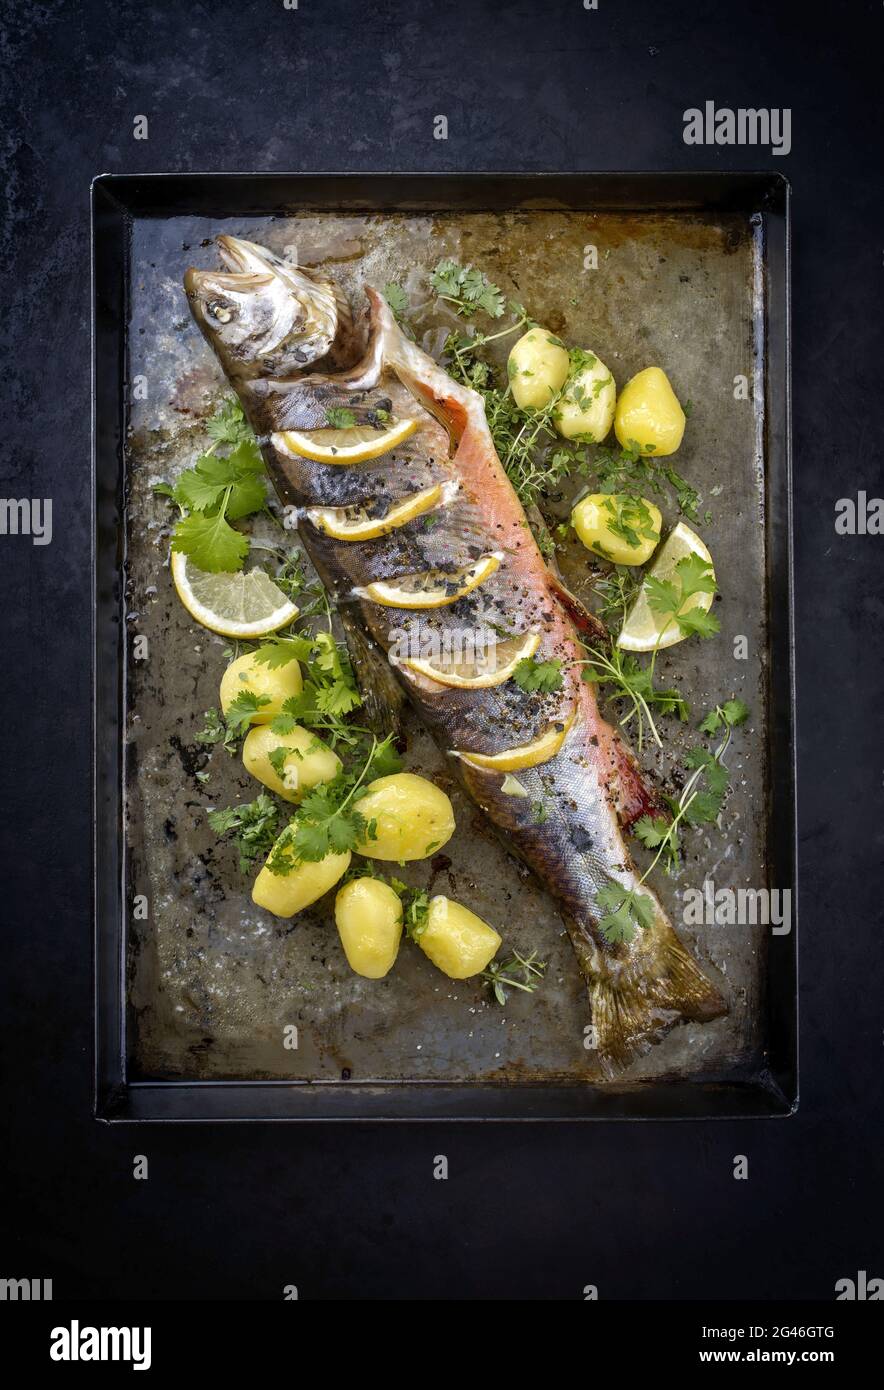 Traditional smoked and roasted char with boiled potatoes and lemon slices offered as top view on a rustic metal tray Stock Photo